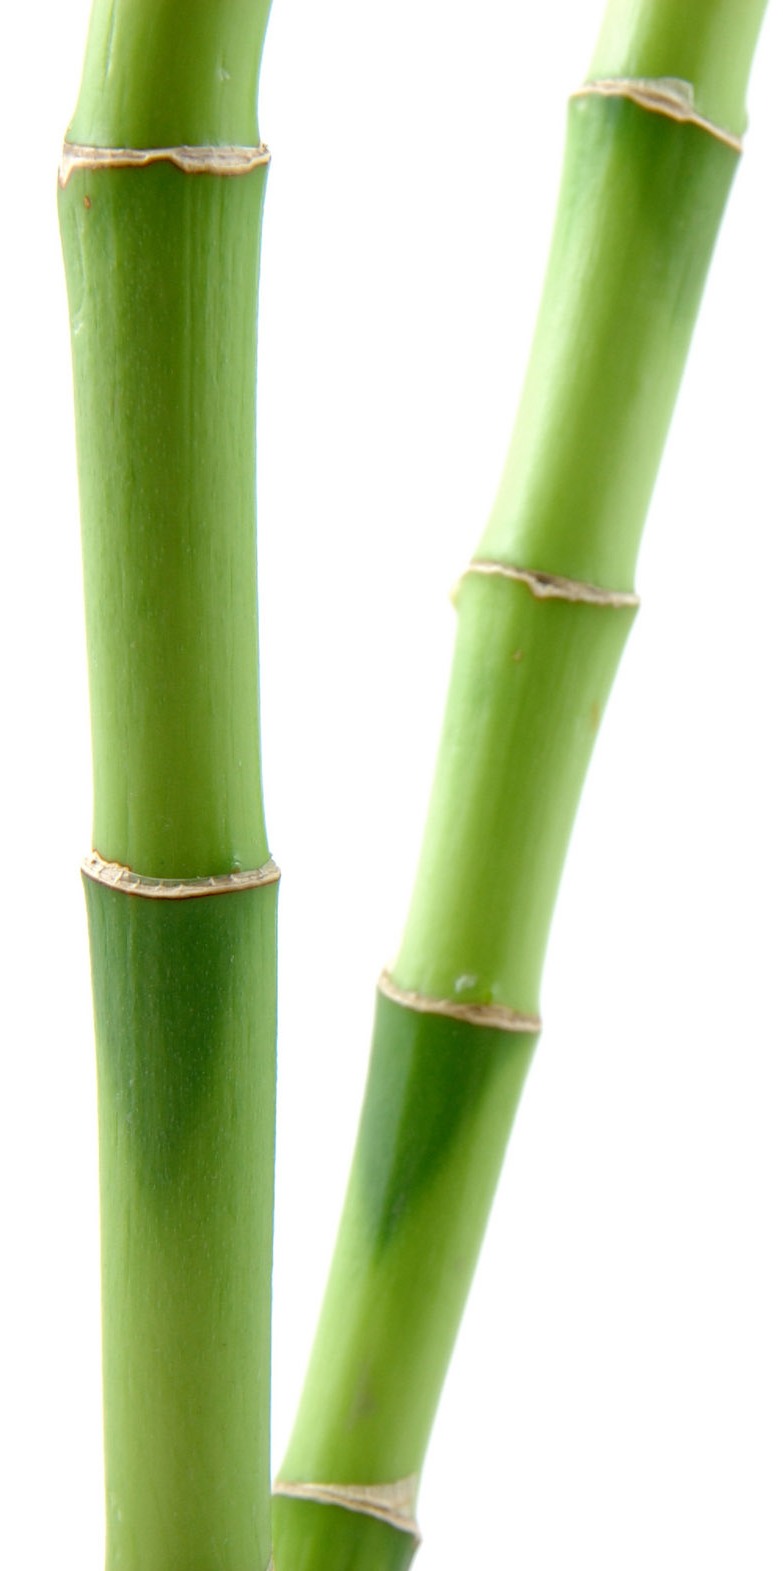 Bamboo Tree Png - ClipArt Best